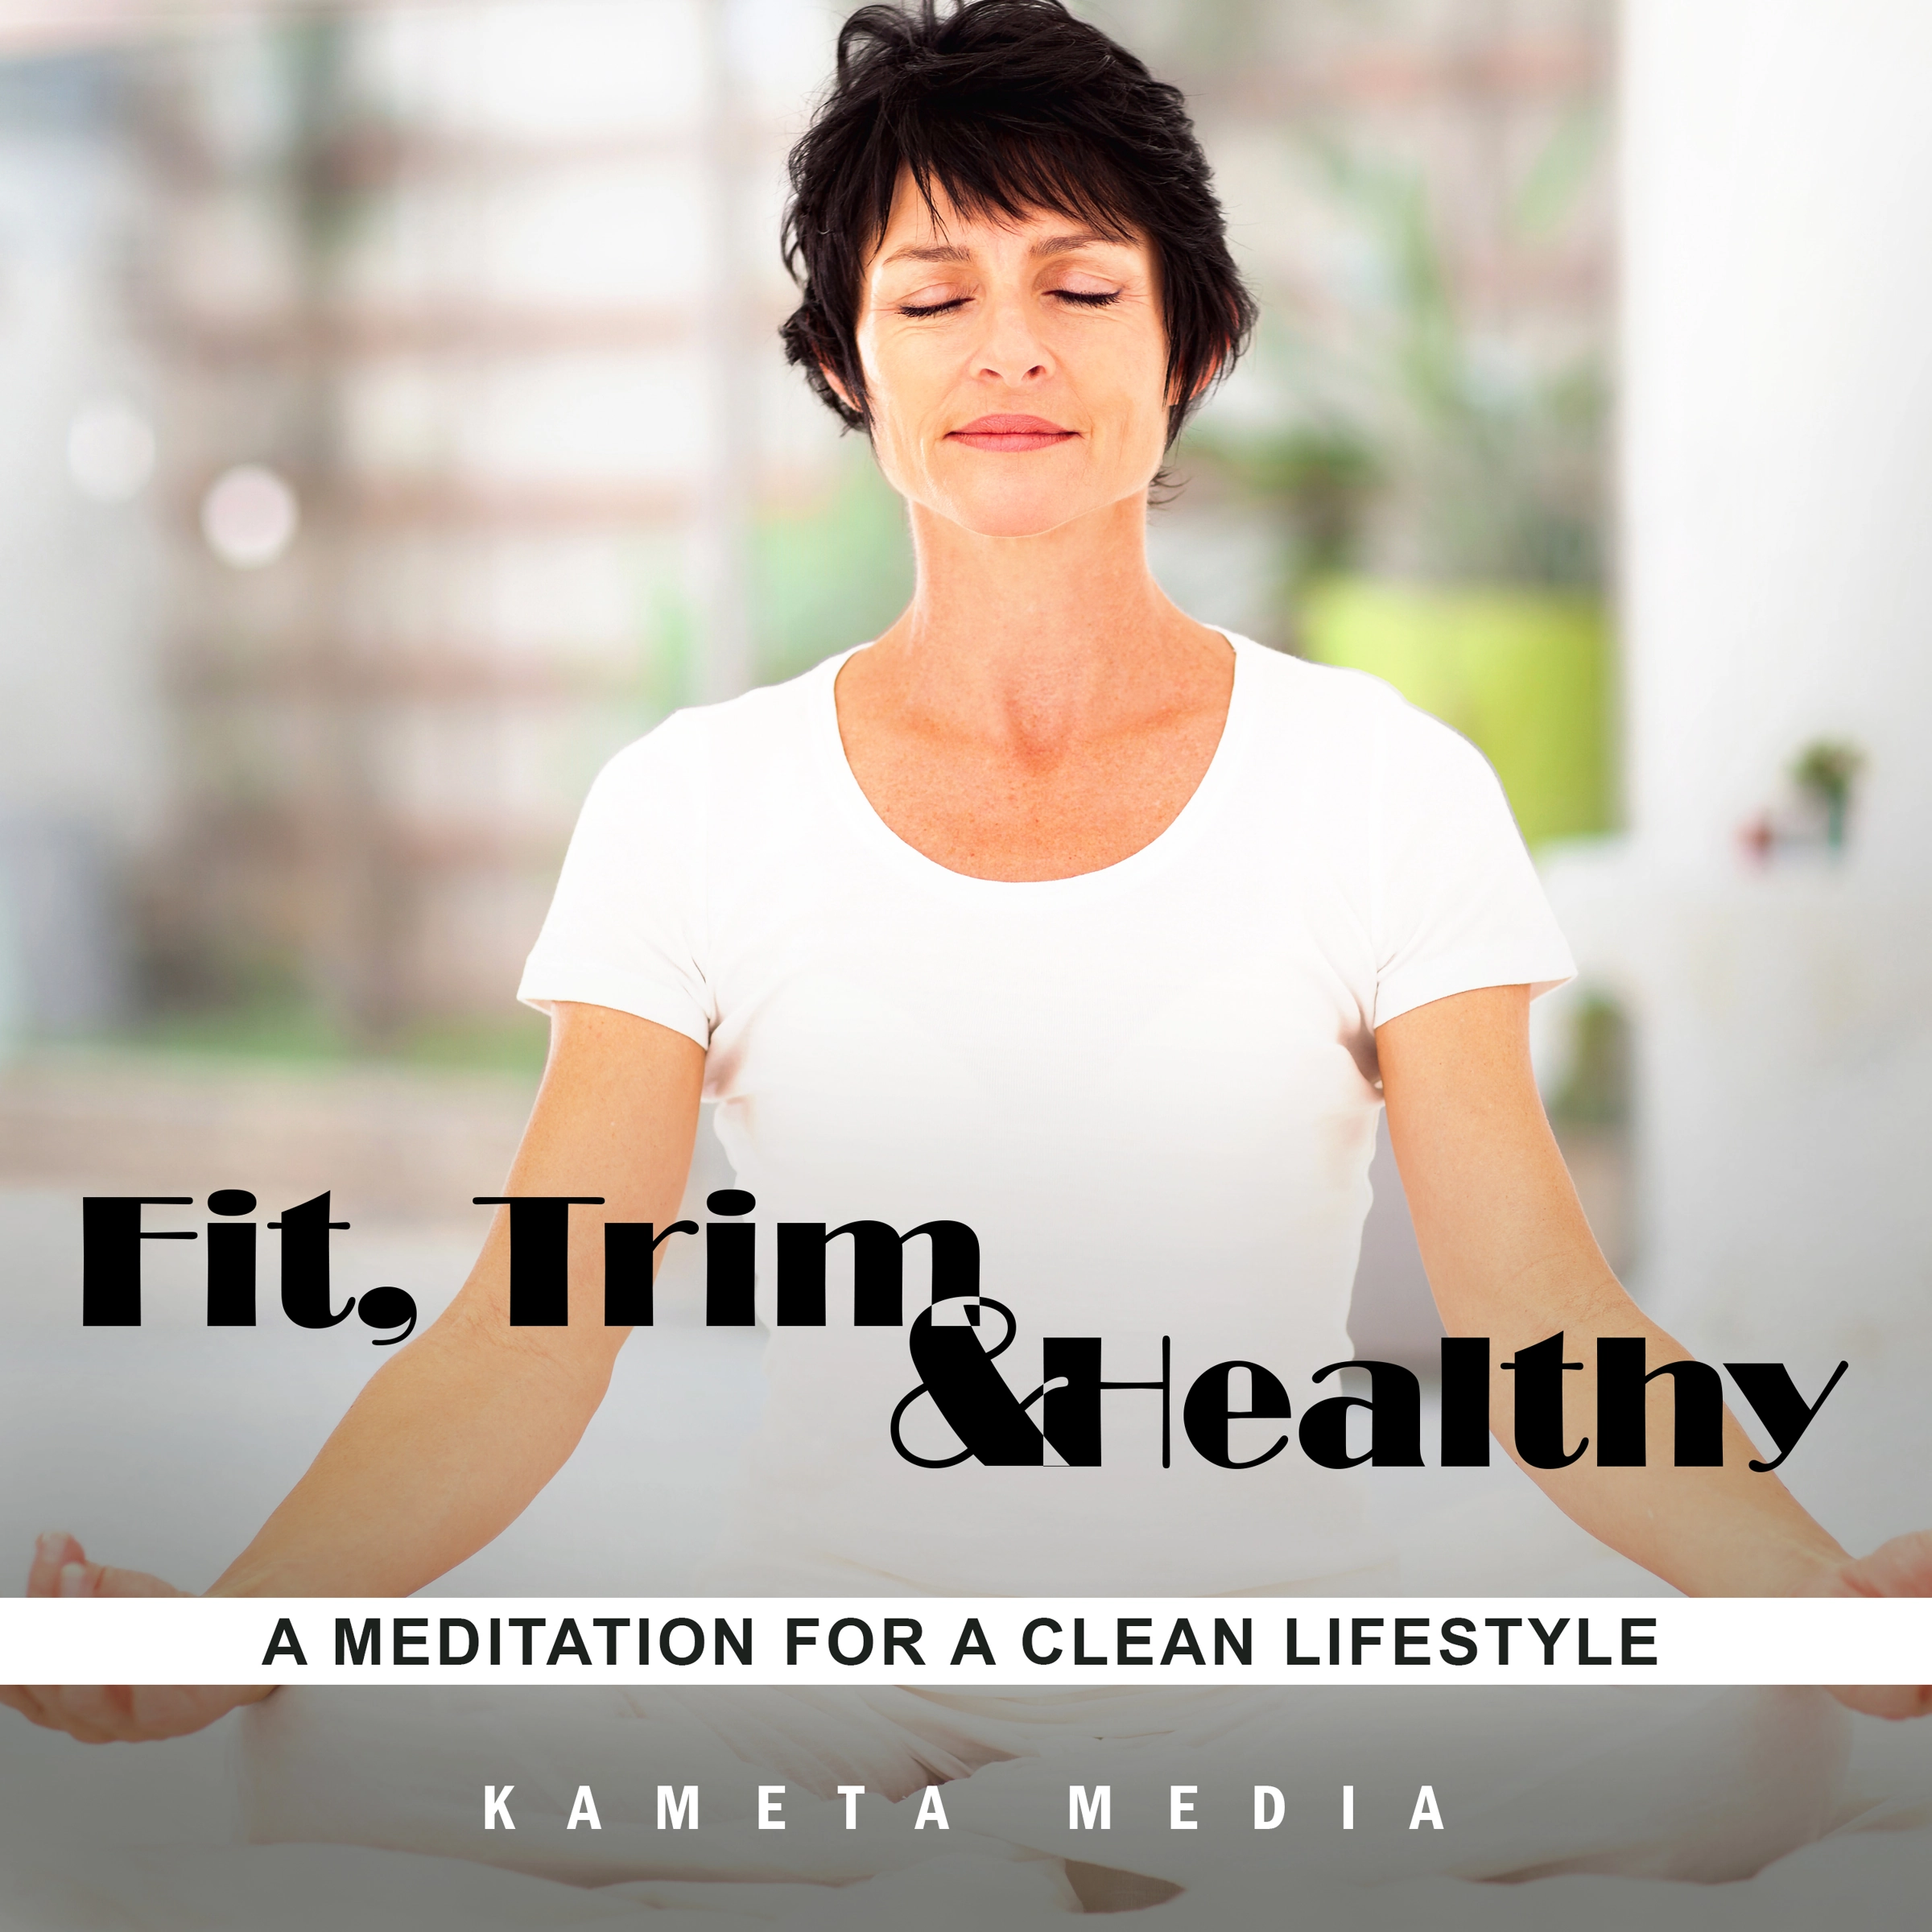 Fit, Trim and Healthy: A Meditation for a Clean Lifestyle Audiobook by Kameta Media